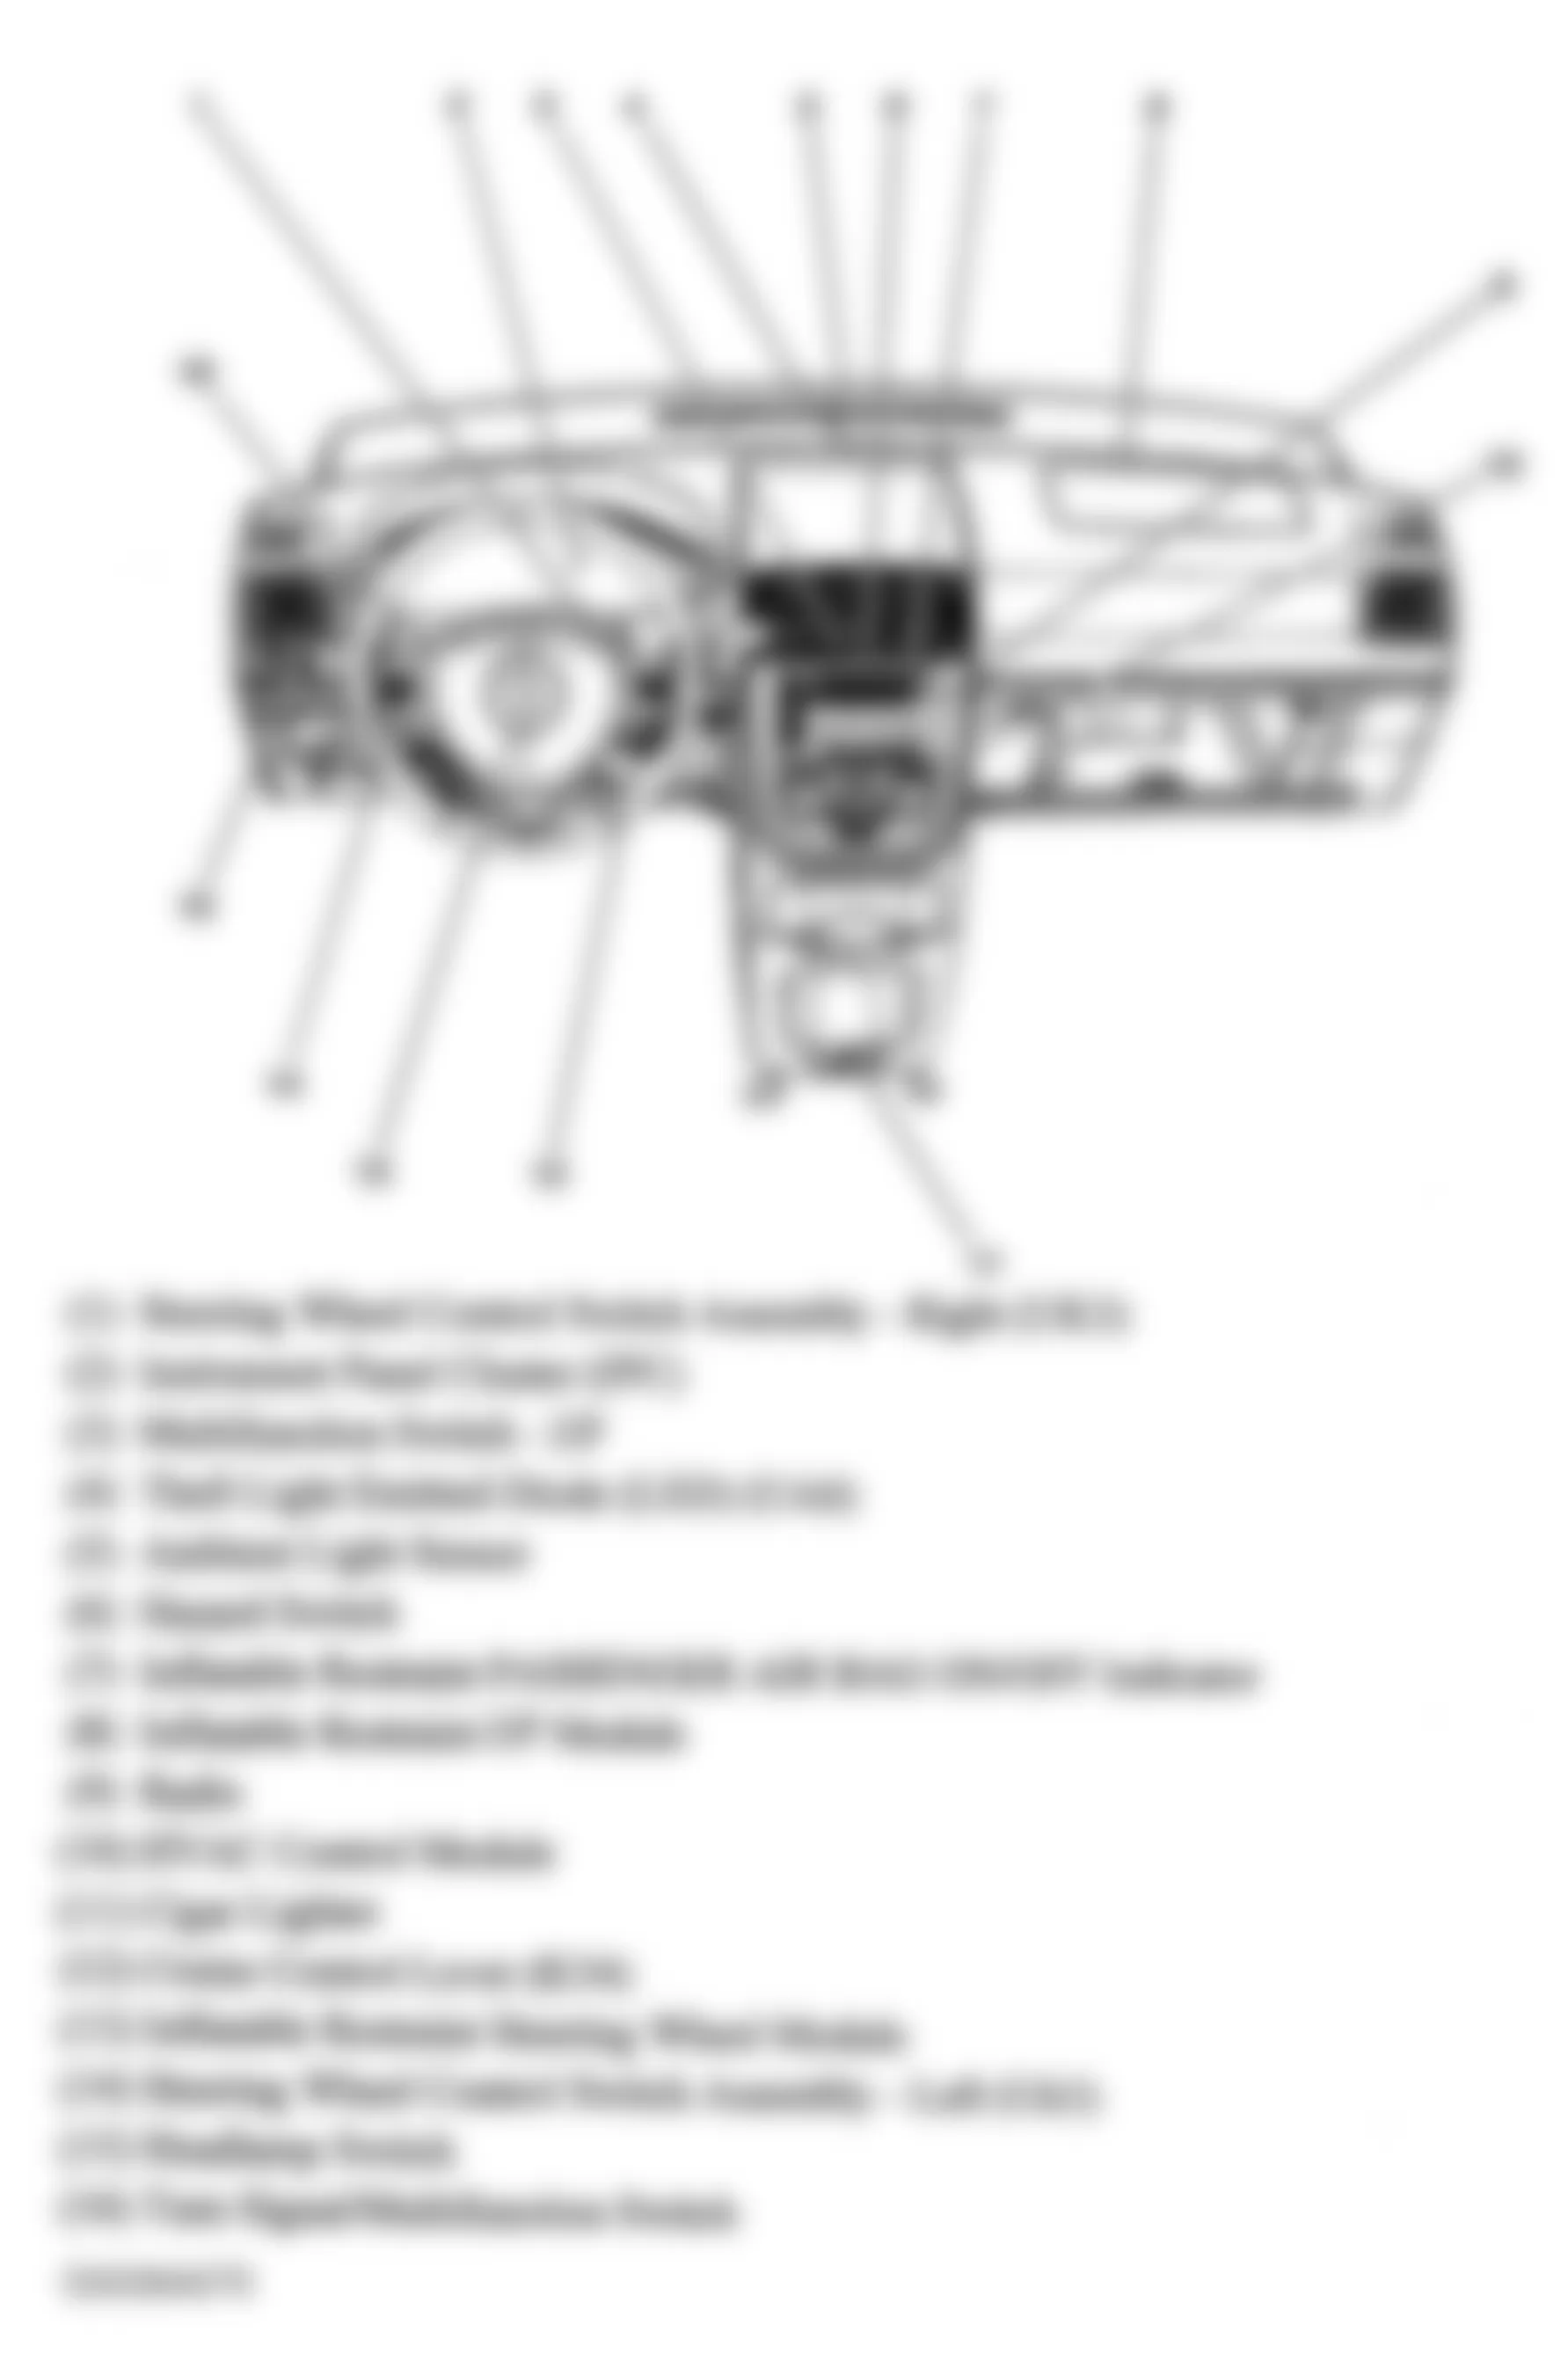 Buick Terraza CXL 2005 - Component Locations -  Dash Assembly